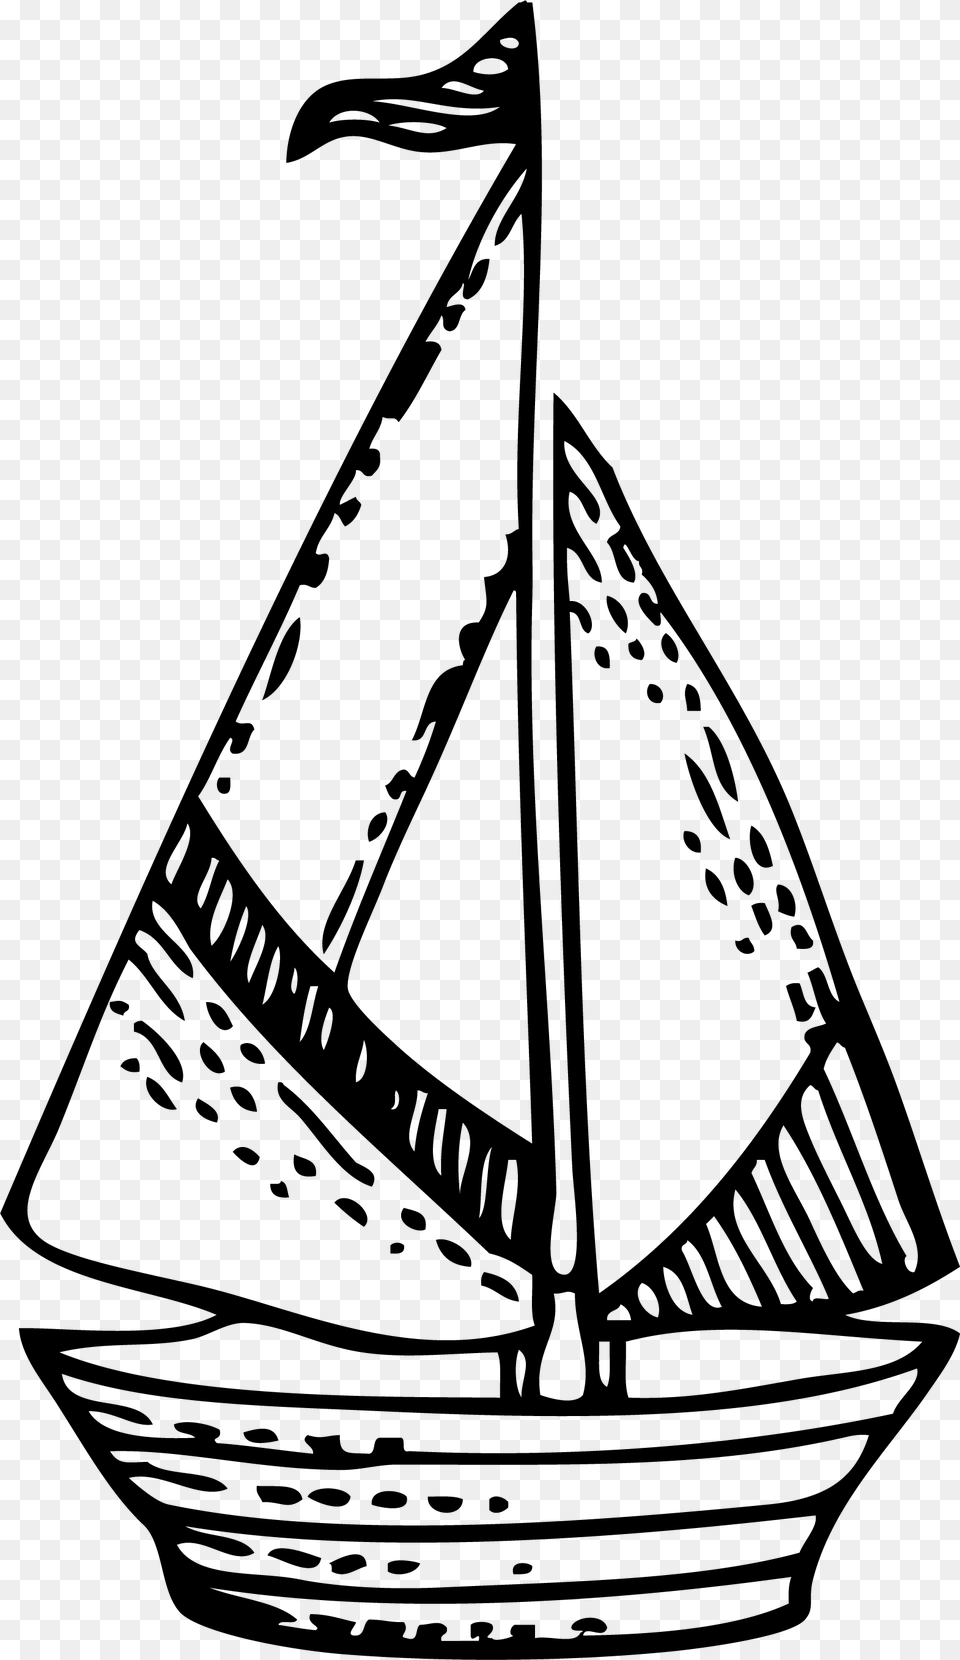 Boat In Palawan Boat Doodle, Lighting, Stencil, Christmas, Christmas Decorations Free Transparent Png